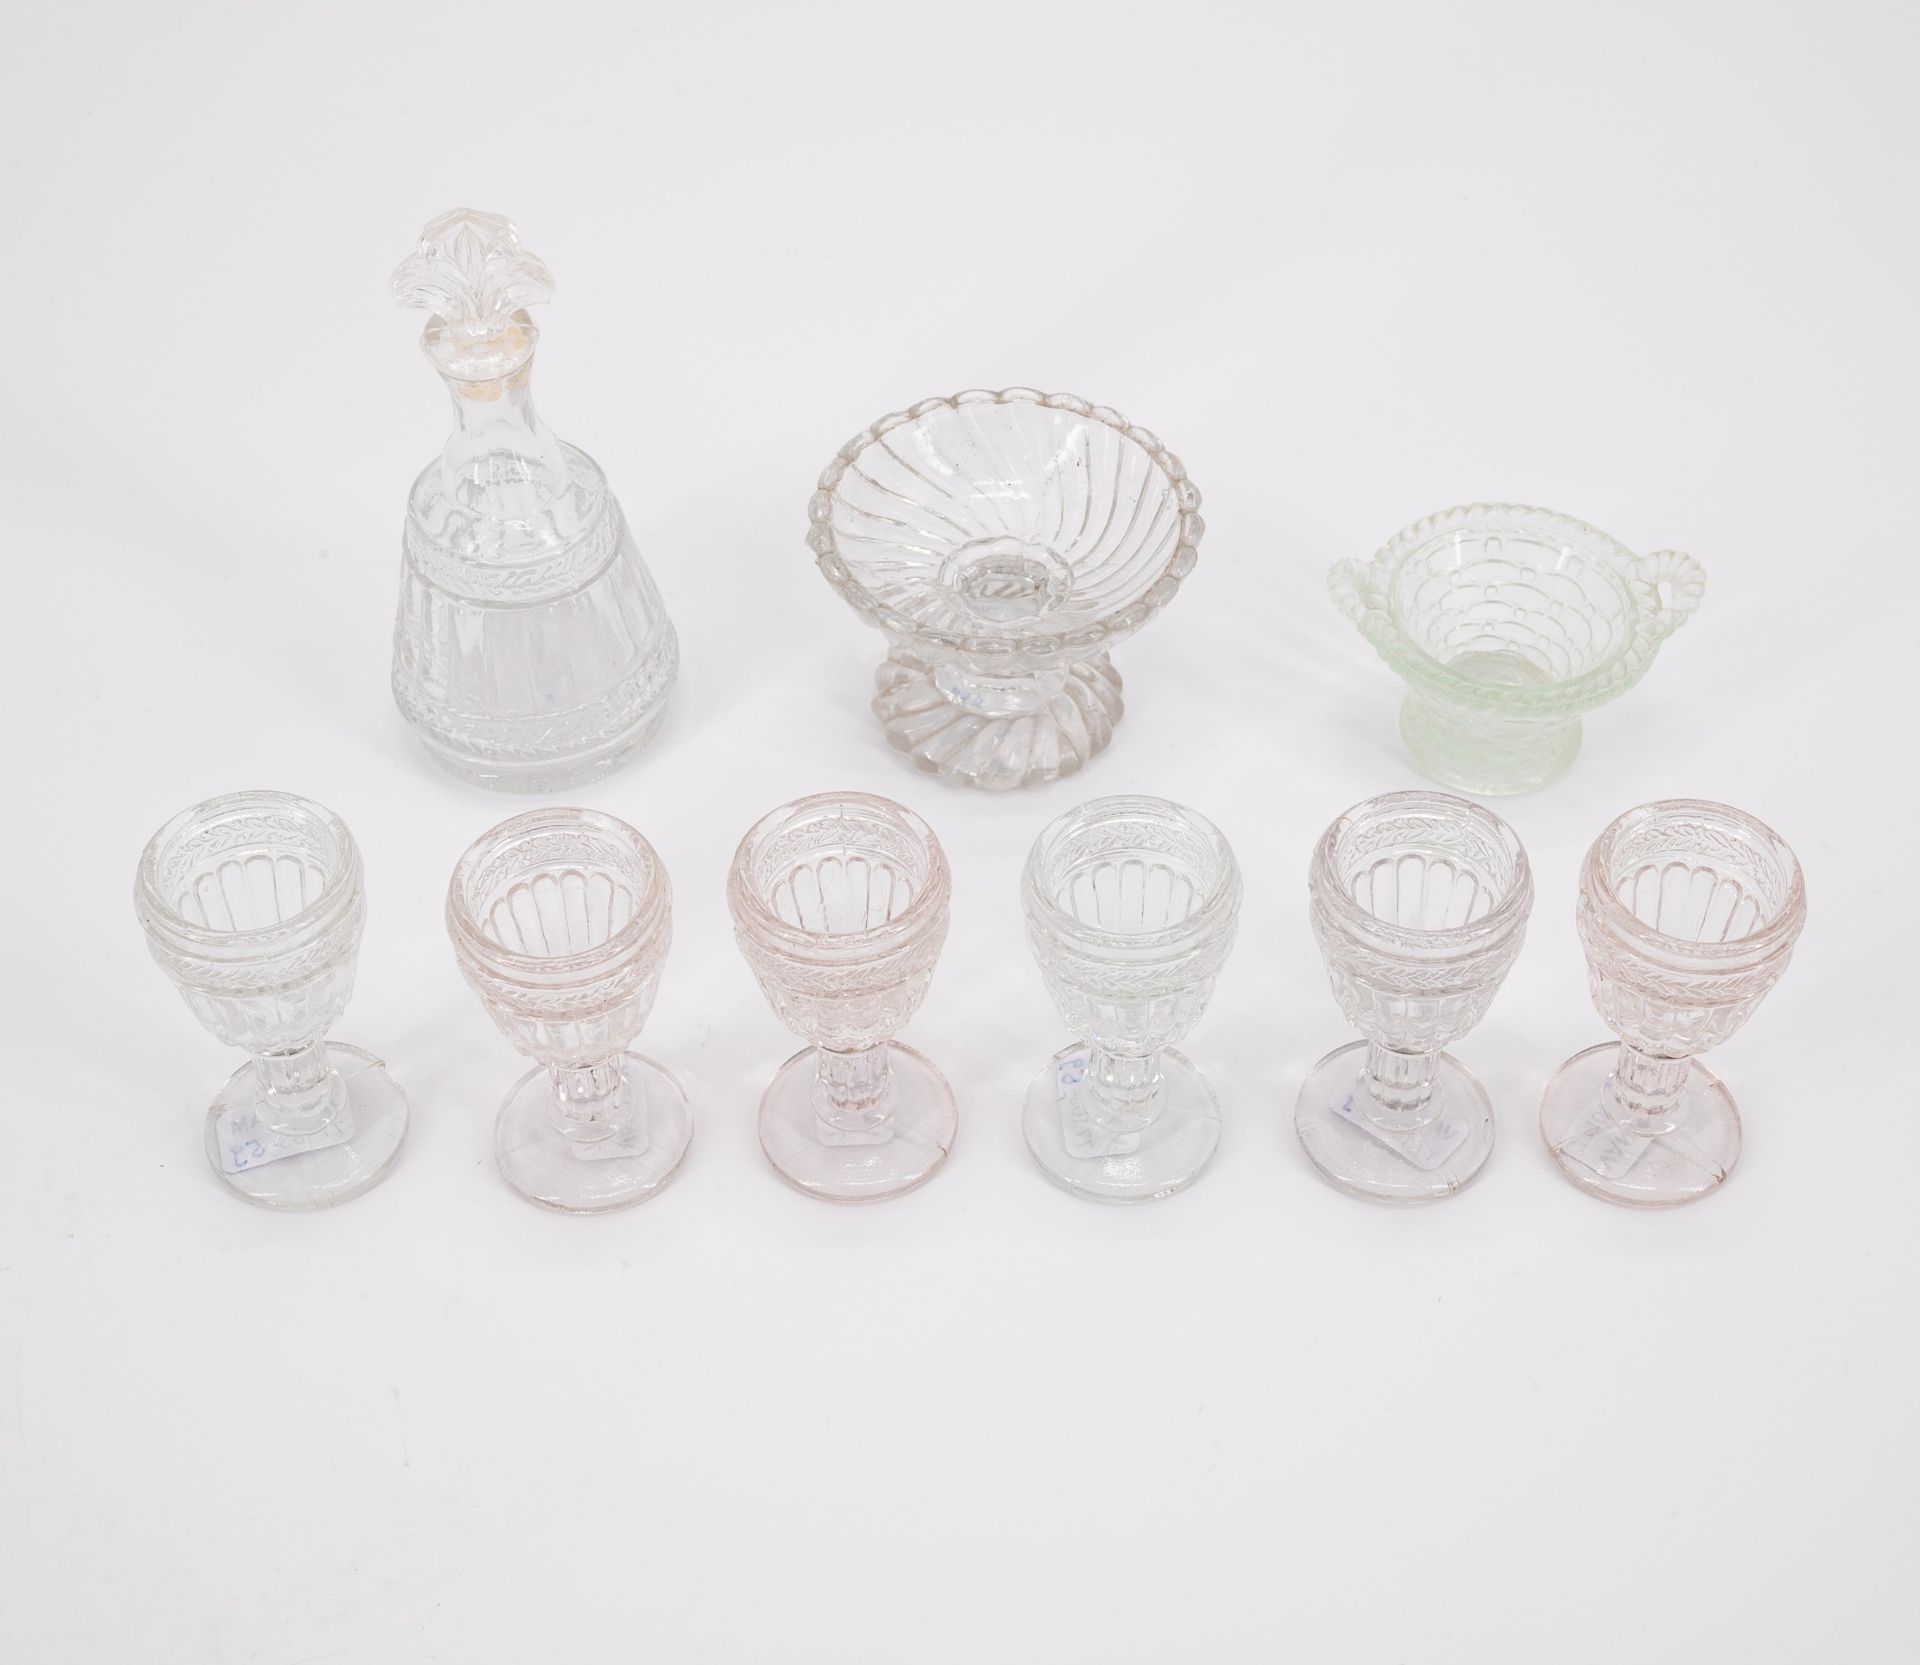 ENSEMBLE OF DOLL'S GLASSWARE MADE OF PRESSED GLASS AND PLASTIC - Image 3 of 3